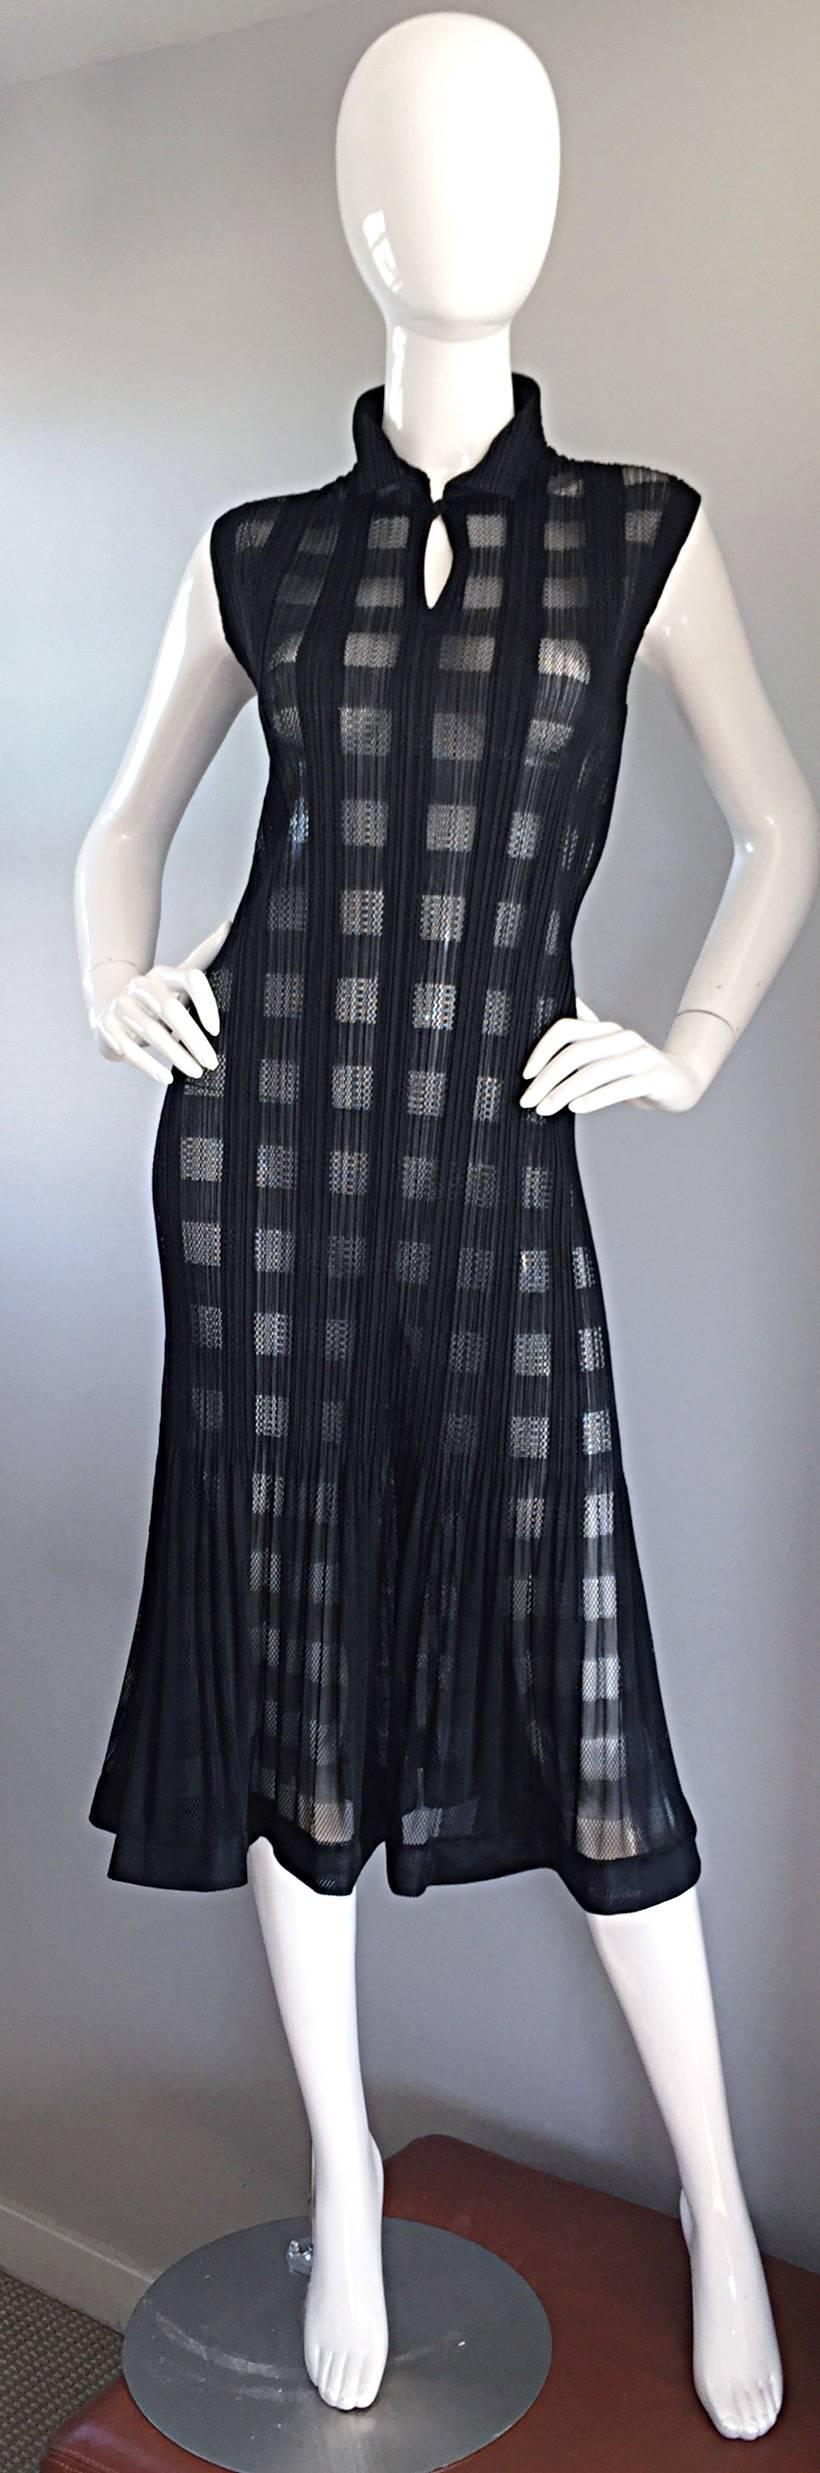 Rare vintage ISSEY MIYAKE black crochet cut-out dress! From his rare, and sought after label 